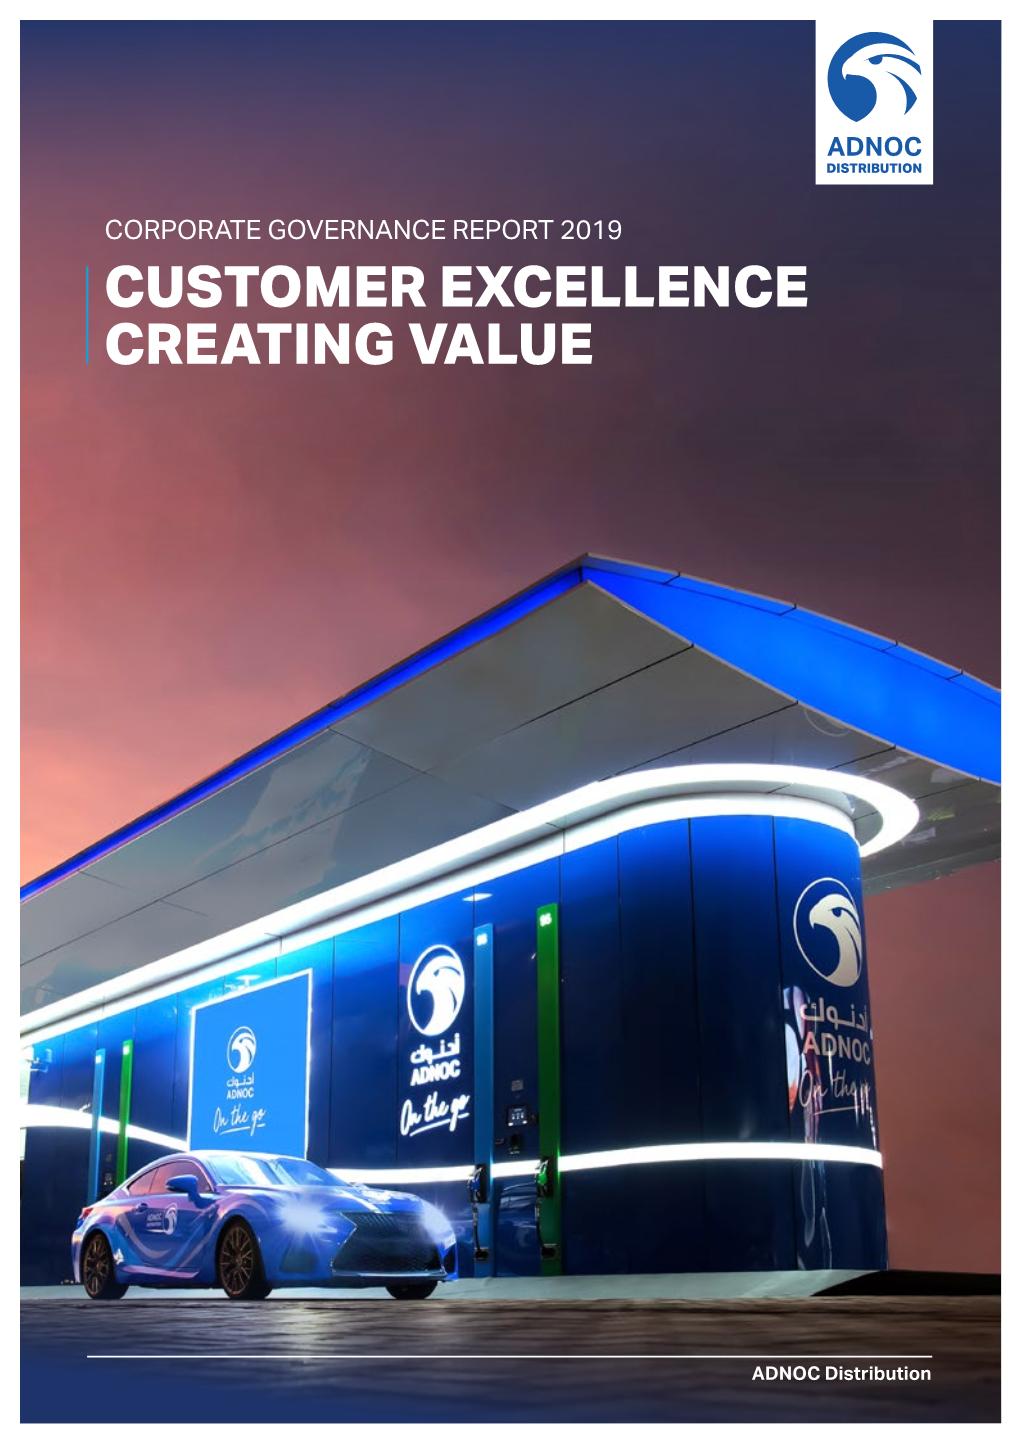 Customer Excellence Creating Value